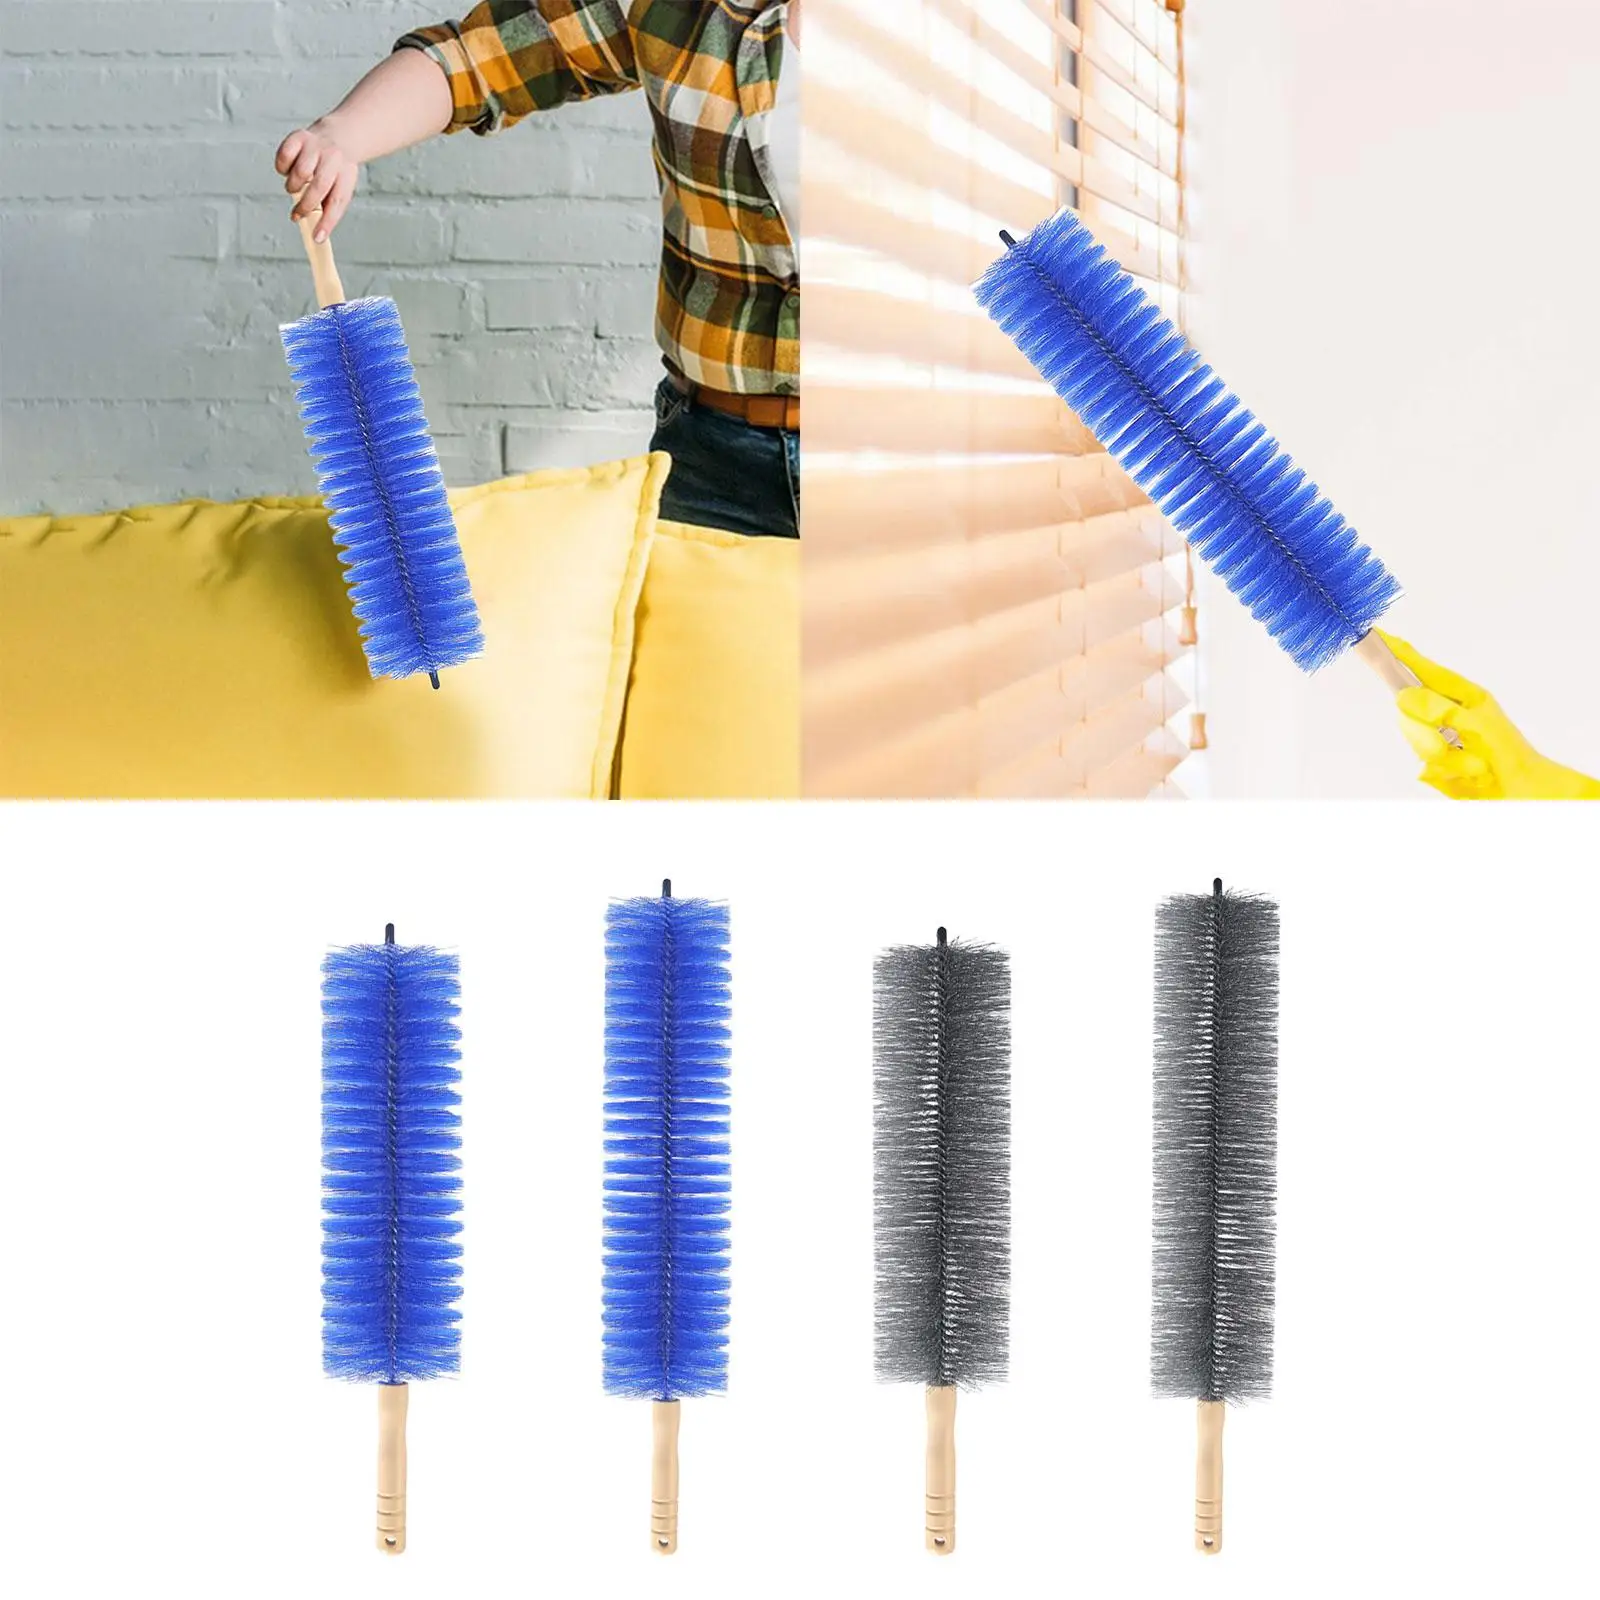 Cleaning Duster Hanging Extendable Dust Cleaning Brush Dust Remover for Car Kitchen Home Office Electrical Dust Removal